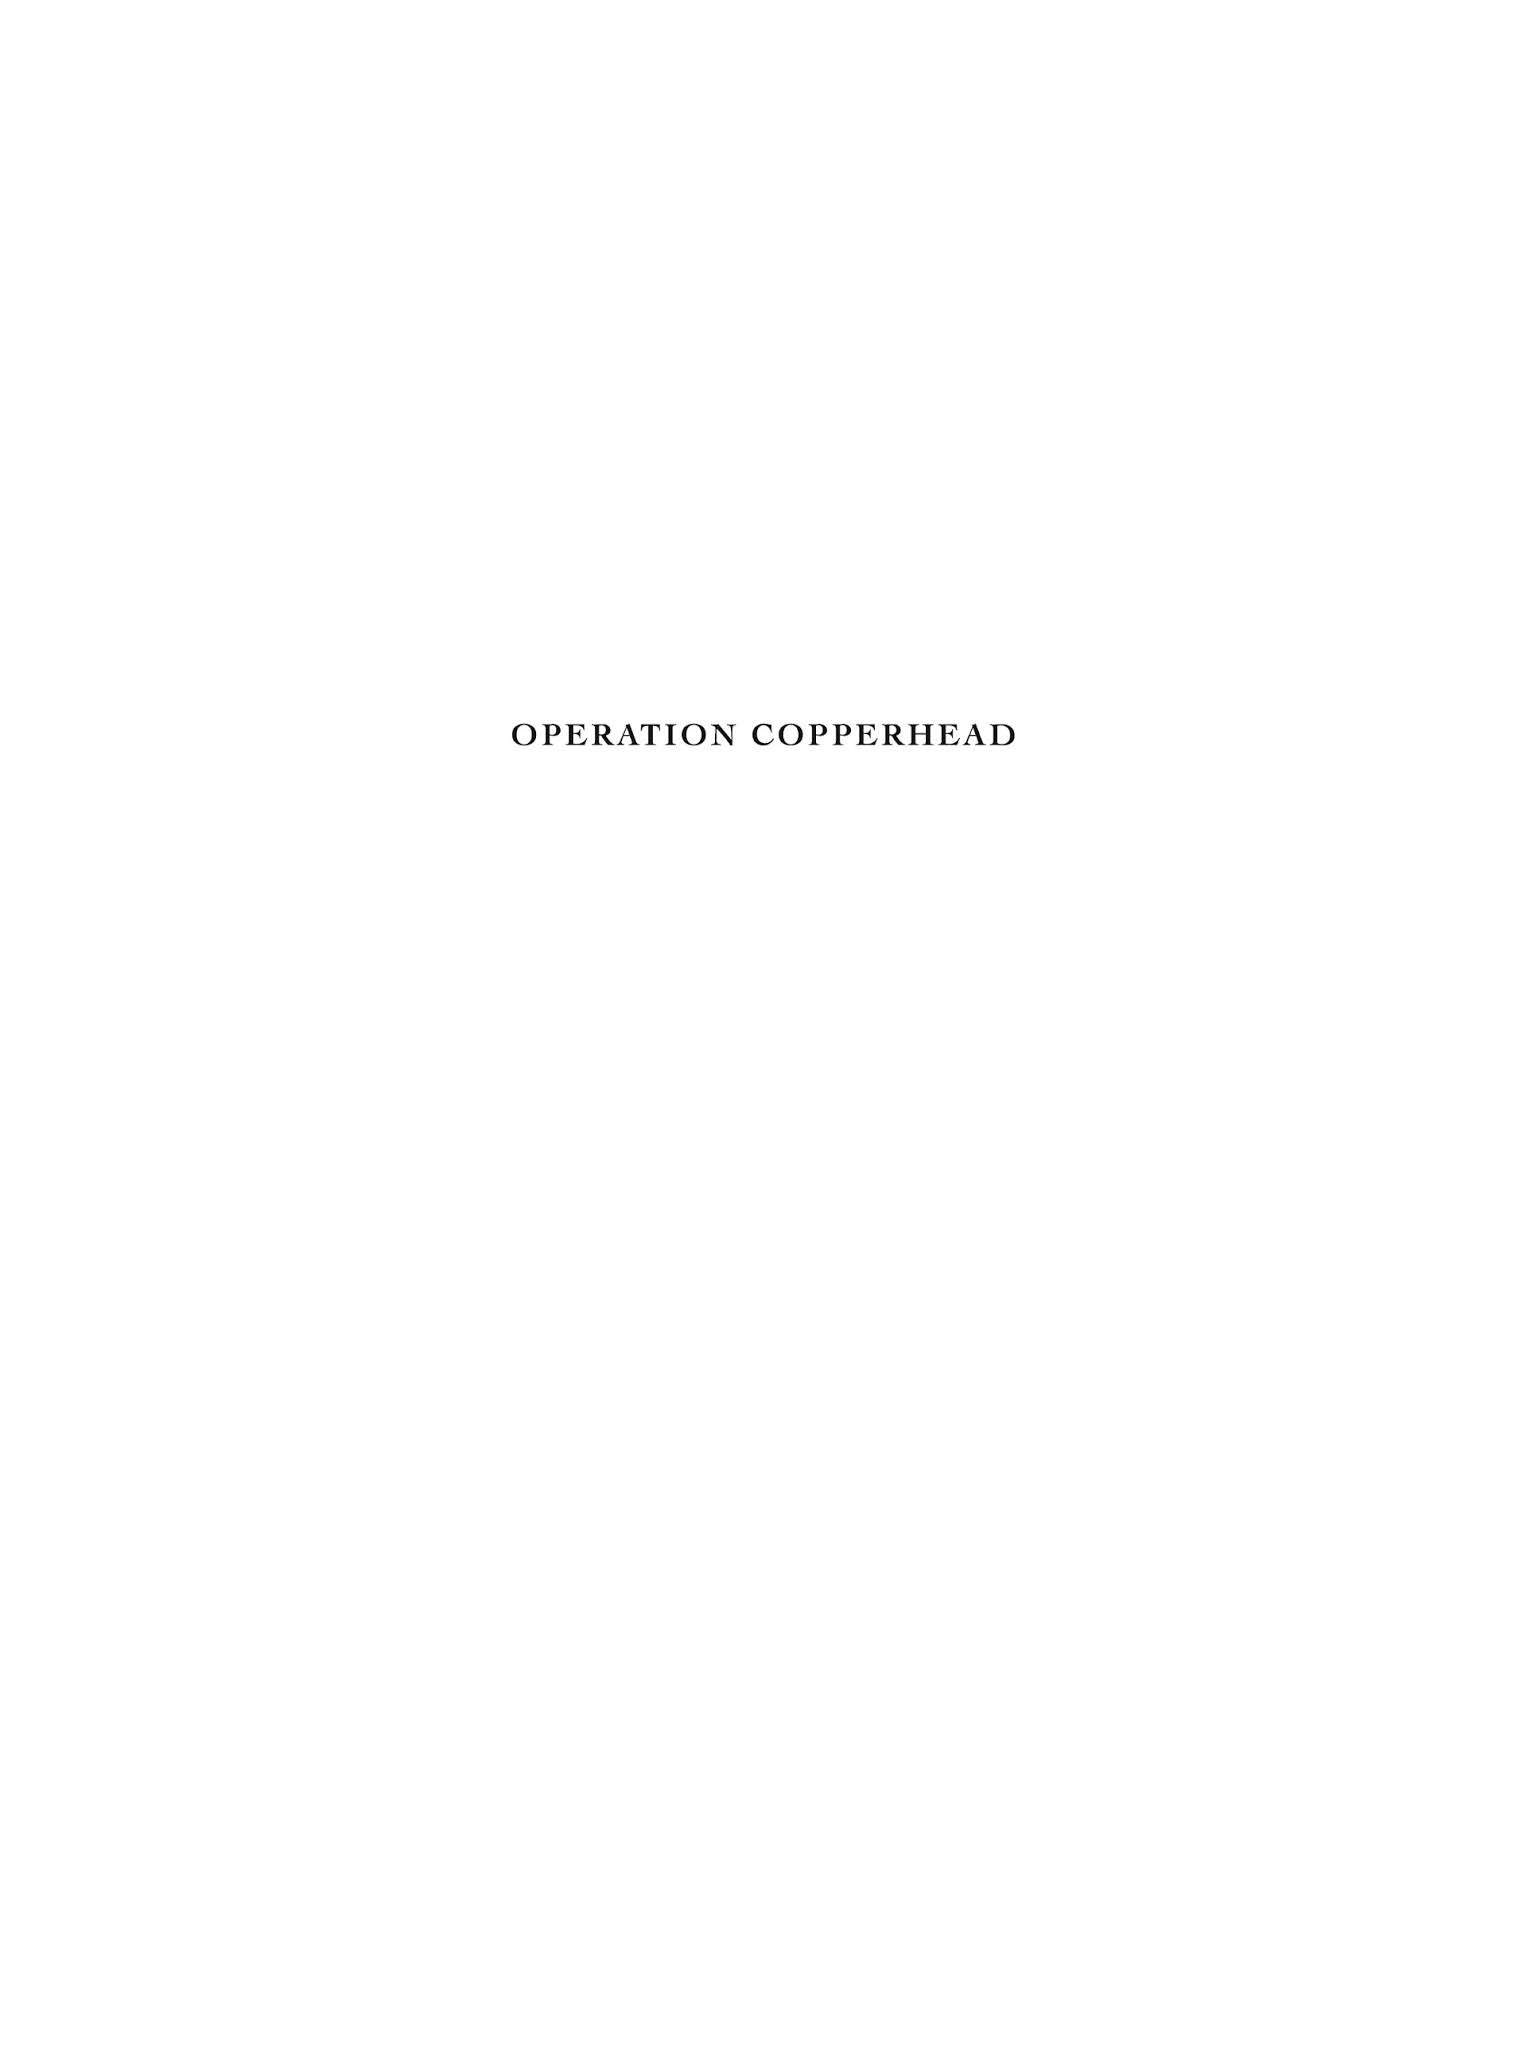 Read online Operation Copperhead comic -  Issue #1 - 3